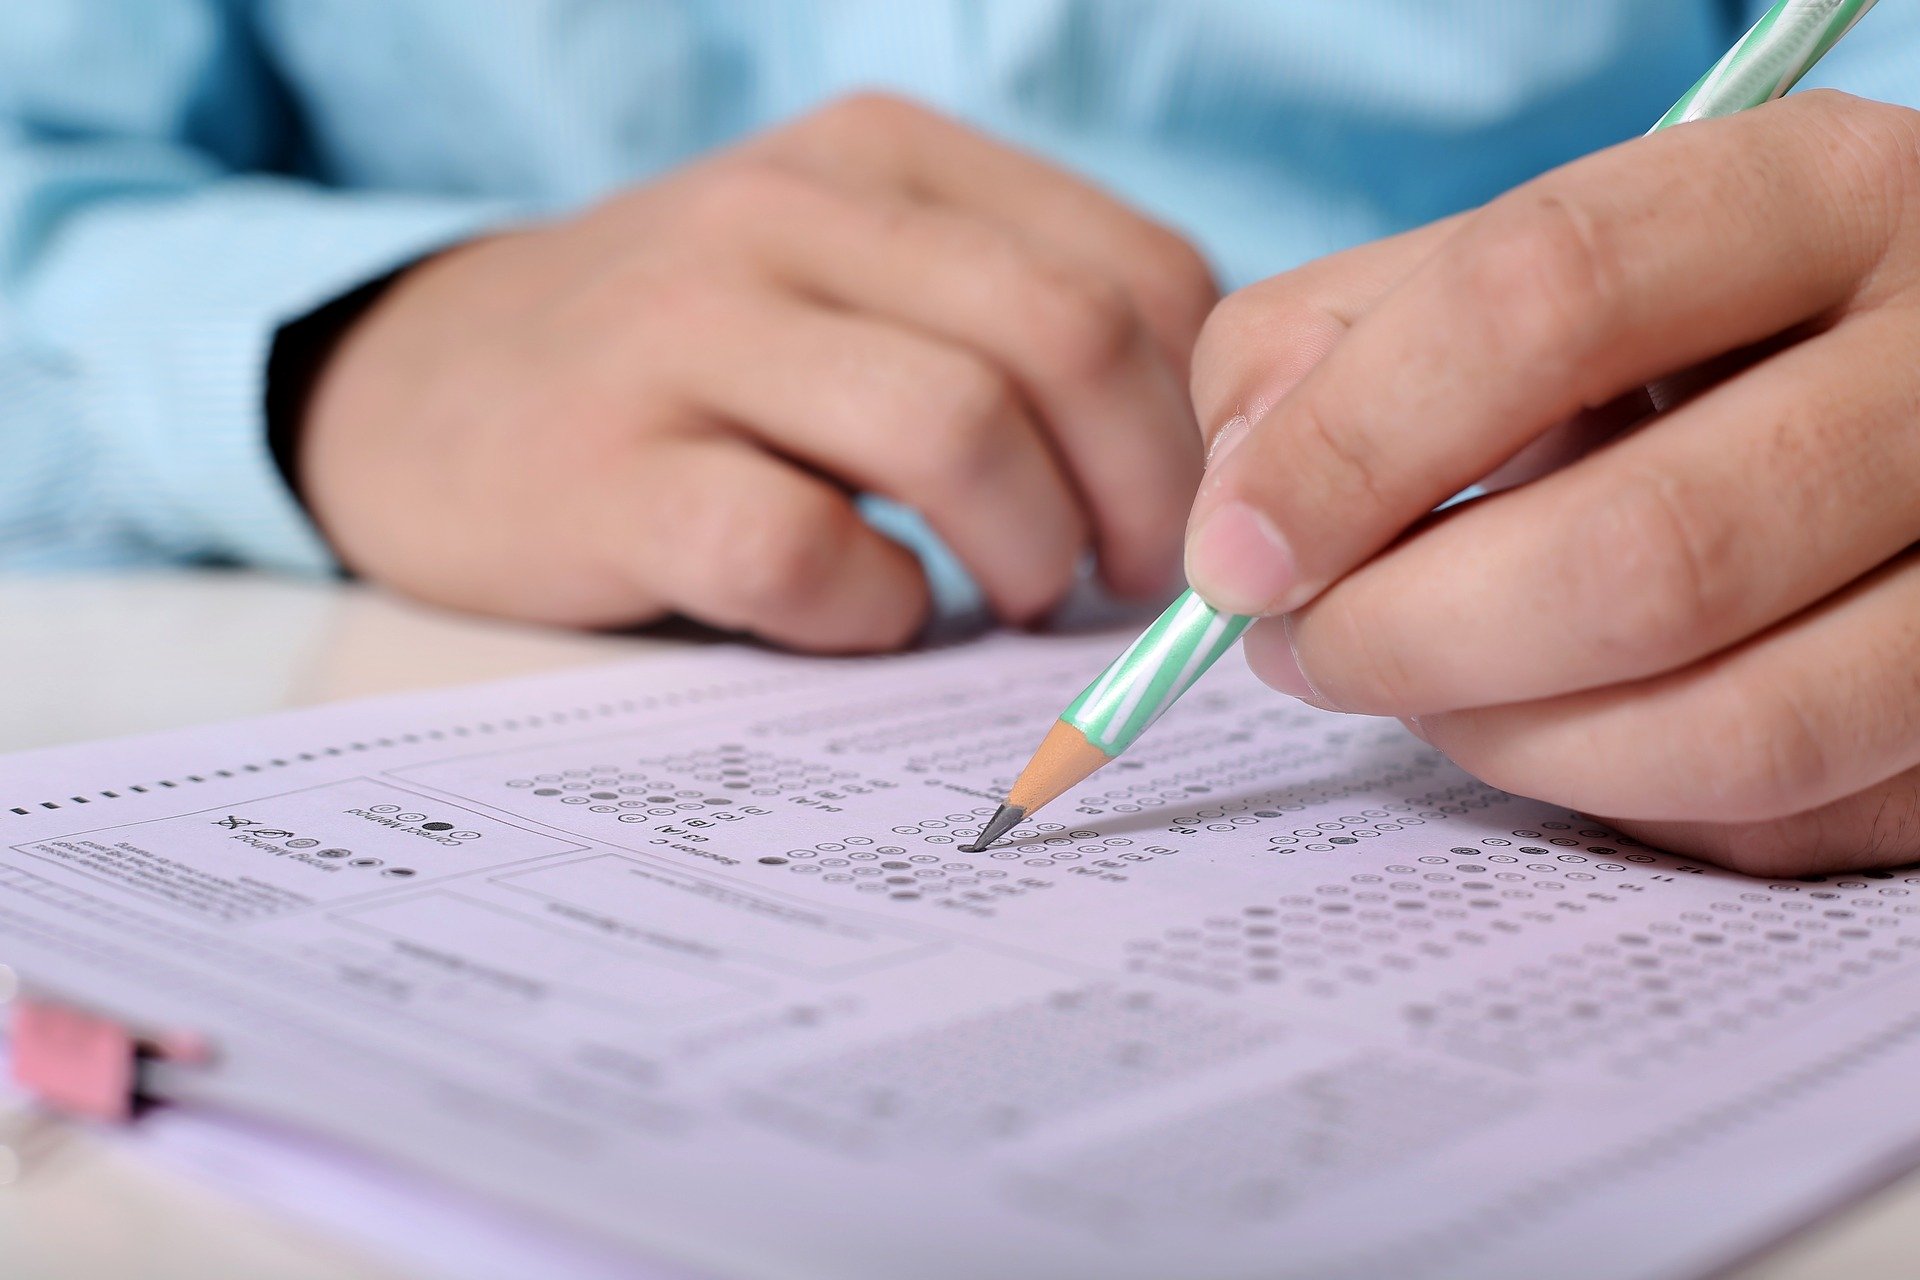 PwC Canada fined over $900,000 by USA and Canadian regulators over exam cheating